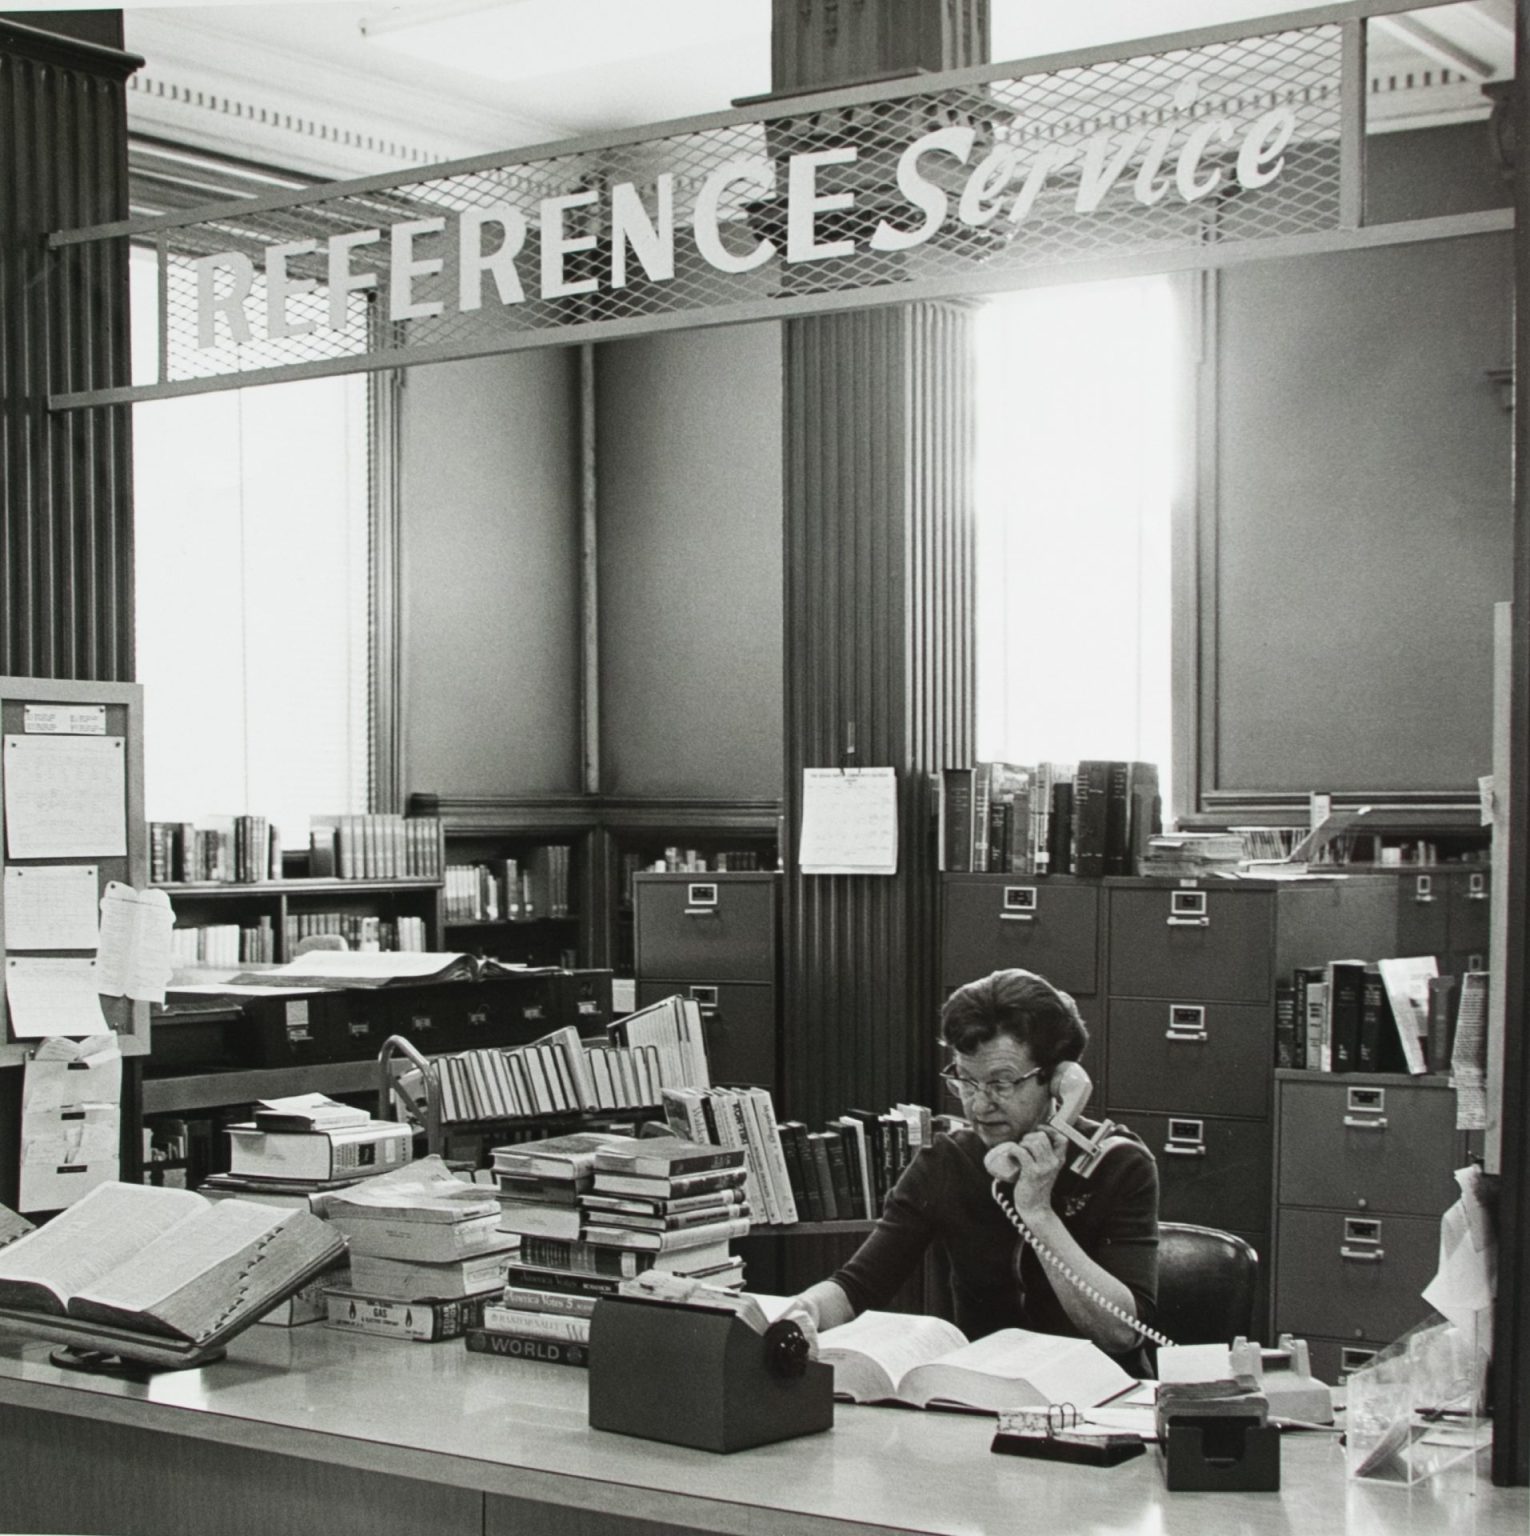 A woman answers a phone at a crowded desk under a "Reference Service" sign in this black and white photo.